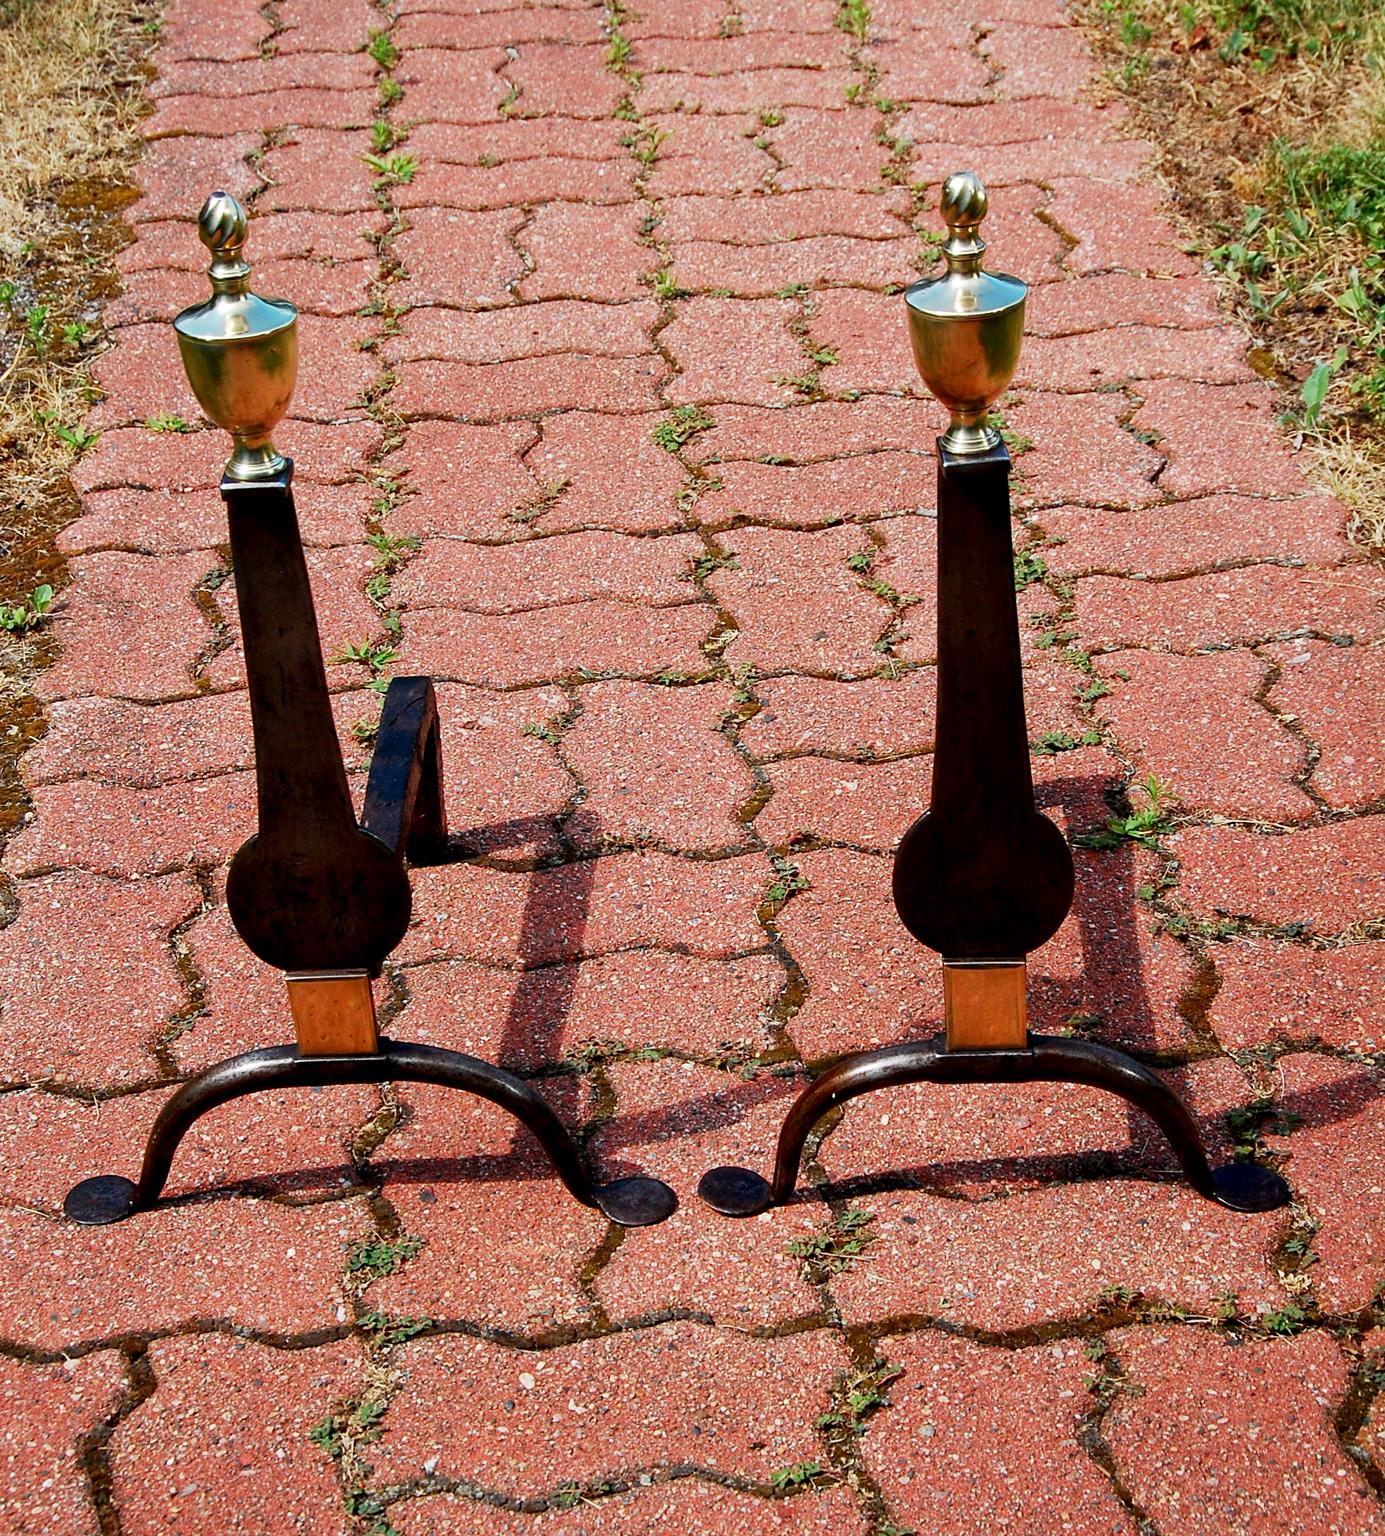 American mid 18th century pair of iron knife blade andirons with brass urn and flame finials.  These early andirons are hand wrought iron, embellished with seamed brass urn and flame finials and having a brass rectangular ornamentation just above